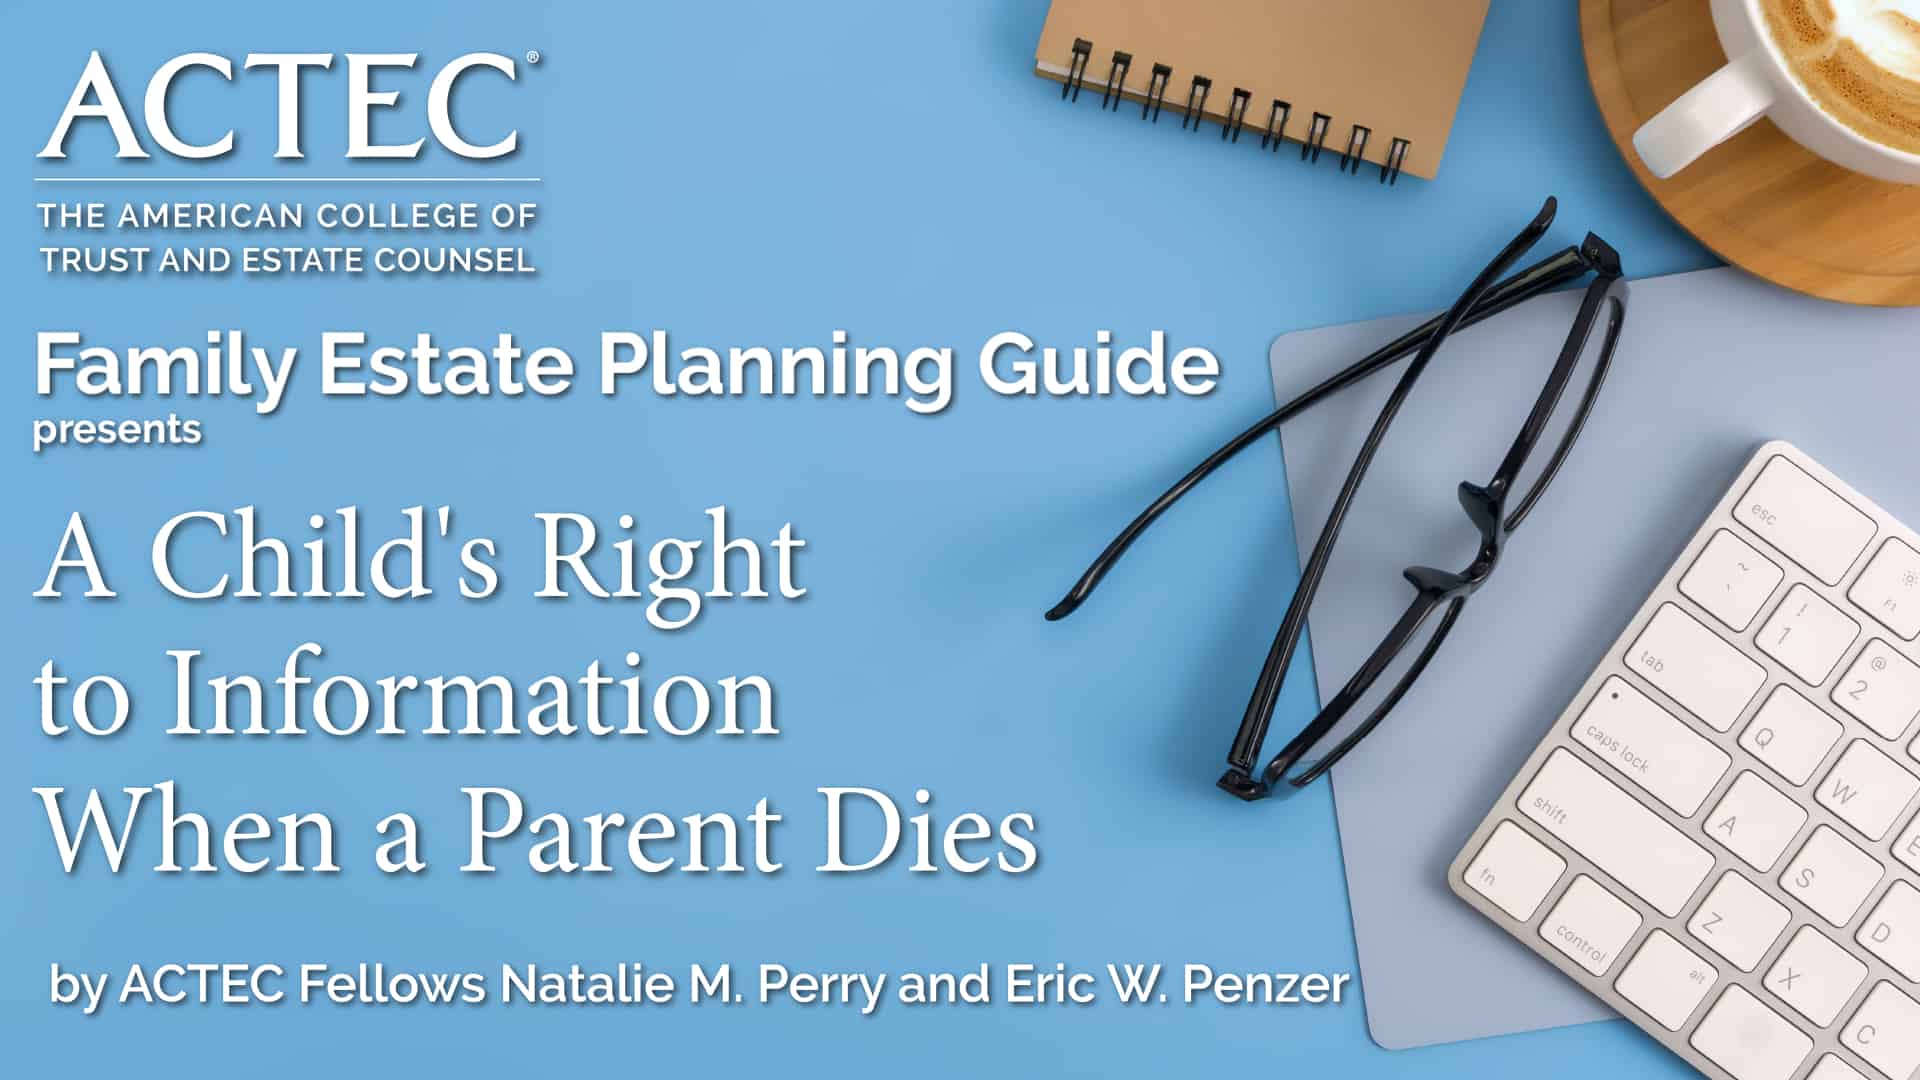 A Child’s Right to Information When a Parent Dies